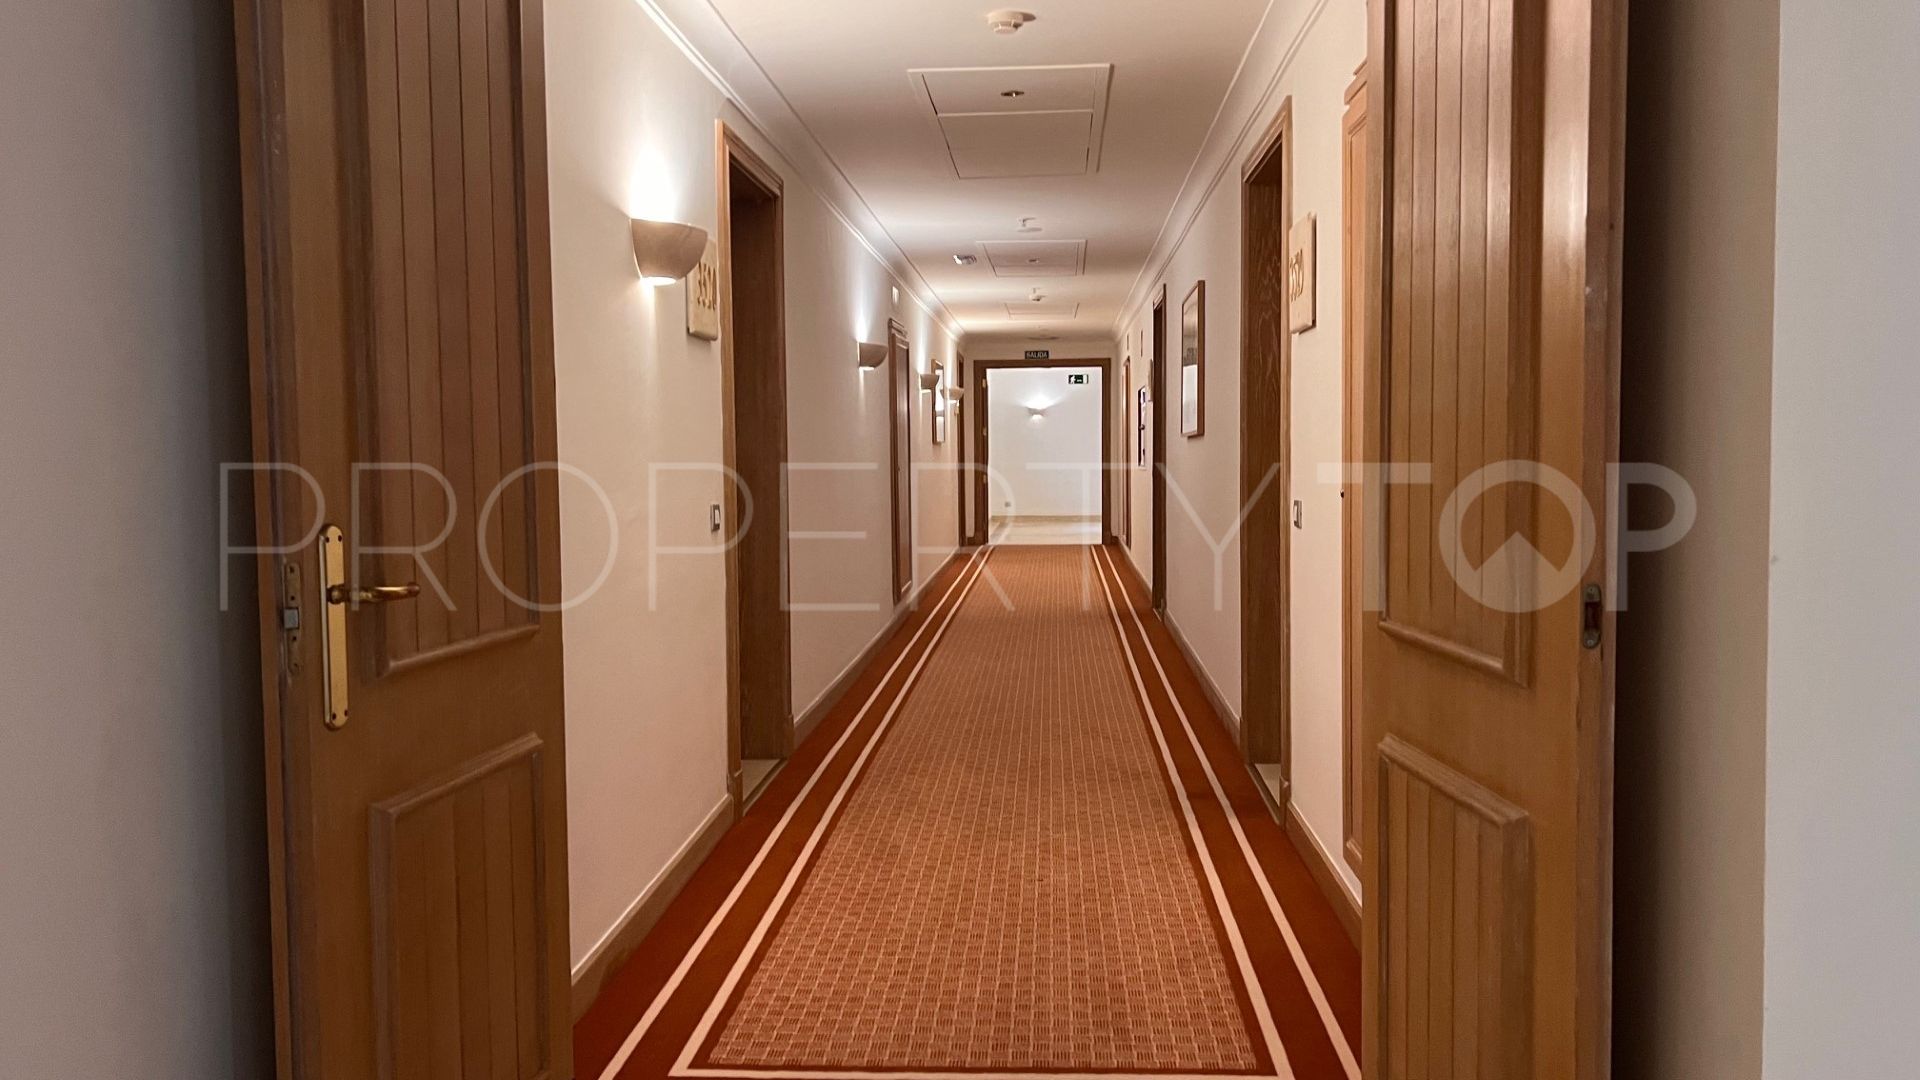 Apartment with 2 bedrooms for sale in Kempinski